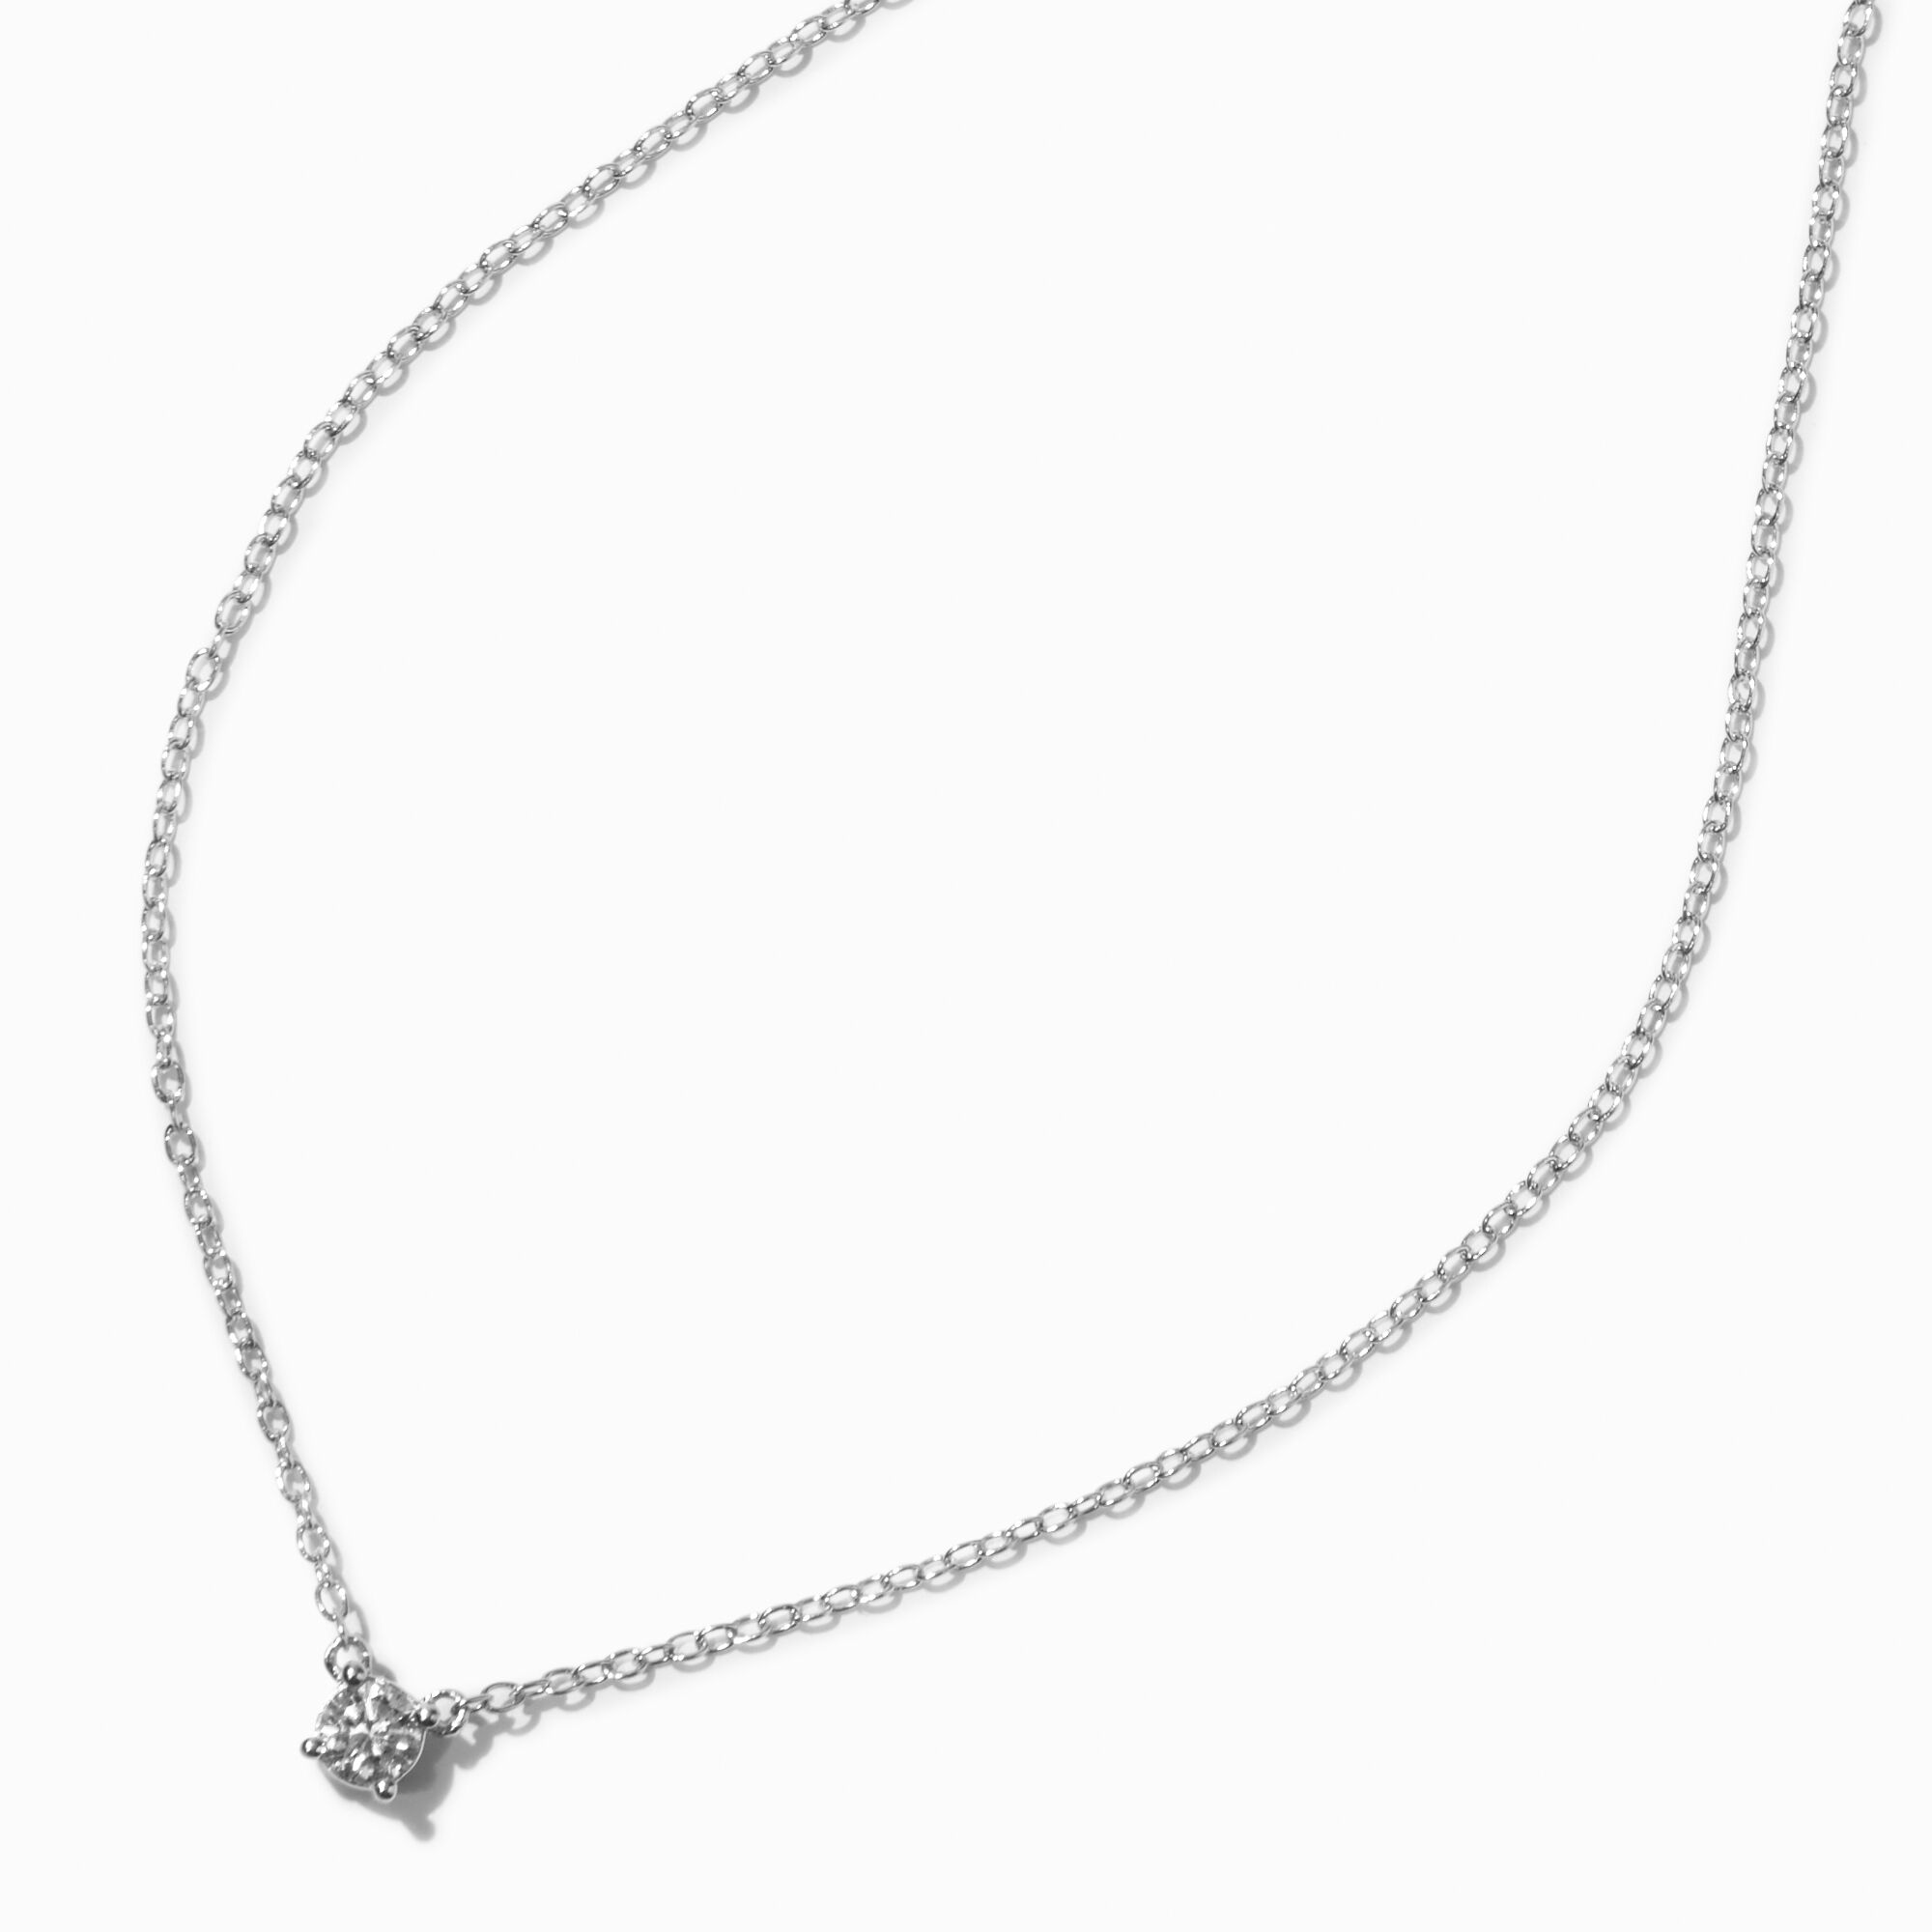 View C Luxe By Claires 110 Ct Tw Lab Grown Diamond Solitaire Basket Pendant Necklace Silver information